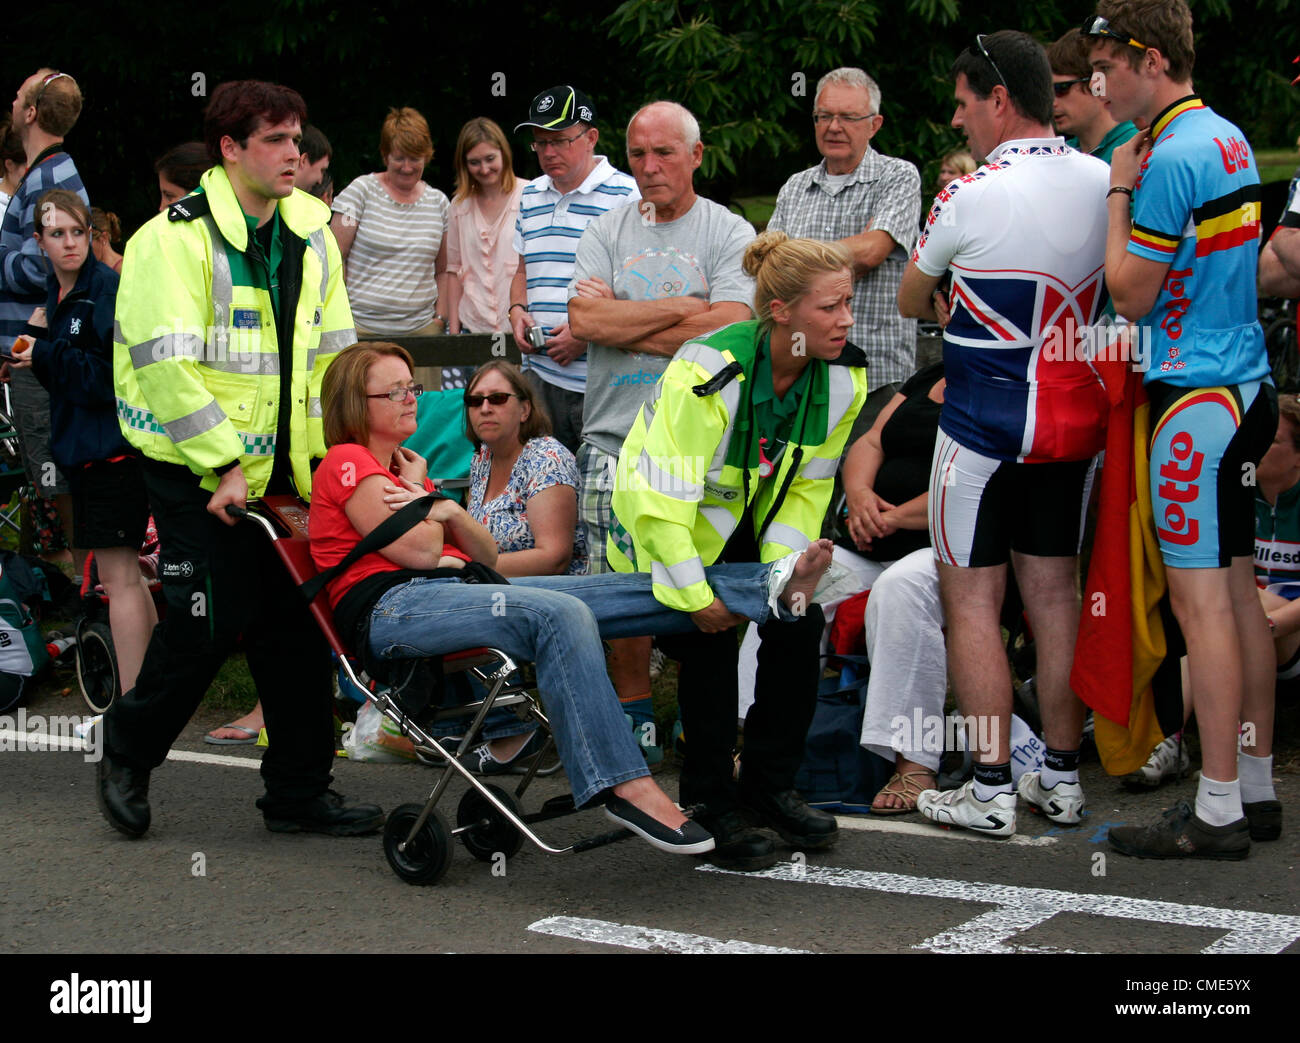 A spectator has had her foot crushed by a vehicle whilst watching Team GB cyclists taking part in the Olympic road race on box hill in Surrey which was attended by massive crowds who were cheering them on the 28th July 2012 aiming to win gold. She was taken to receive treatment by st johns ambulance. Stock Photo